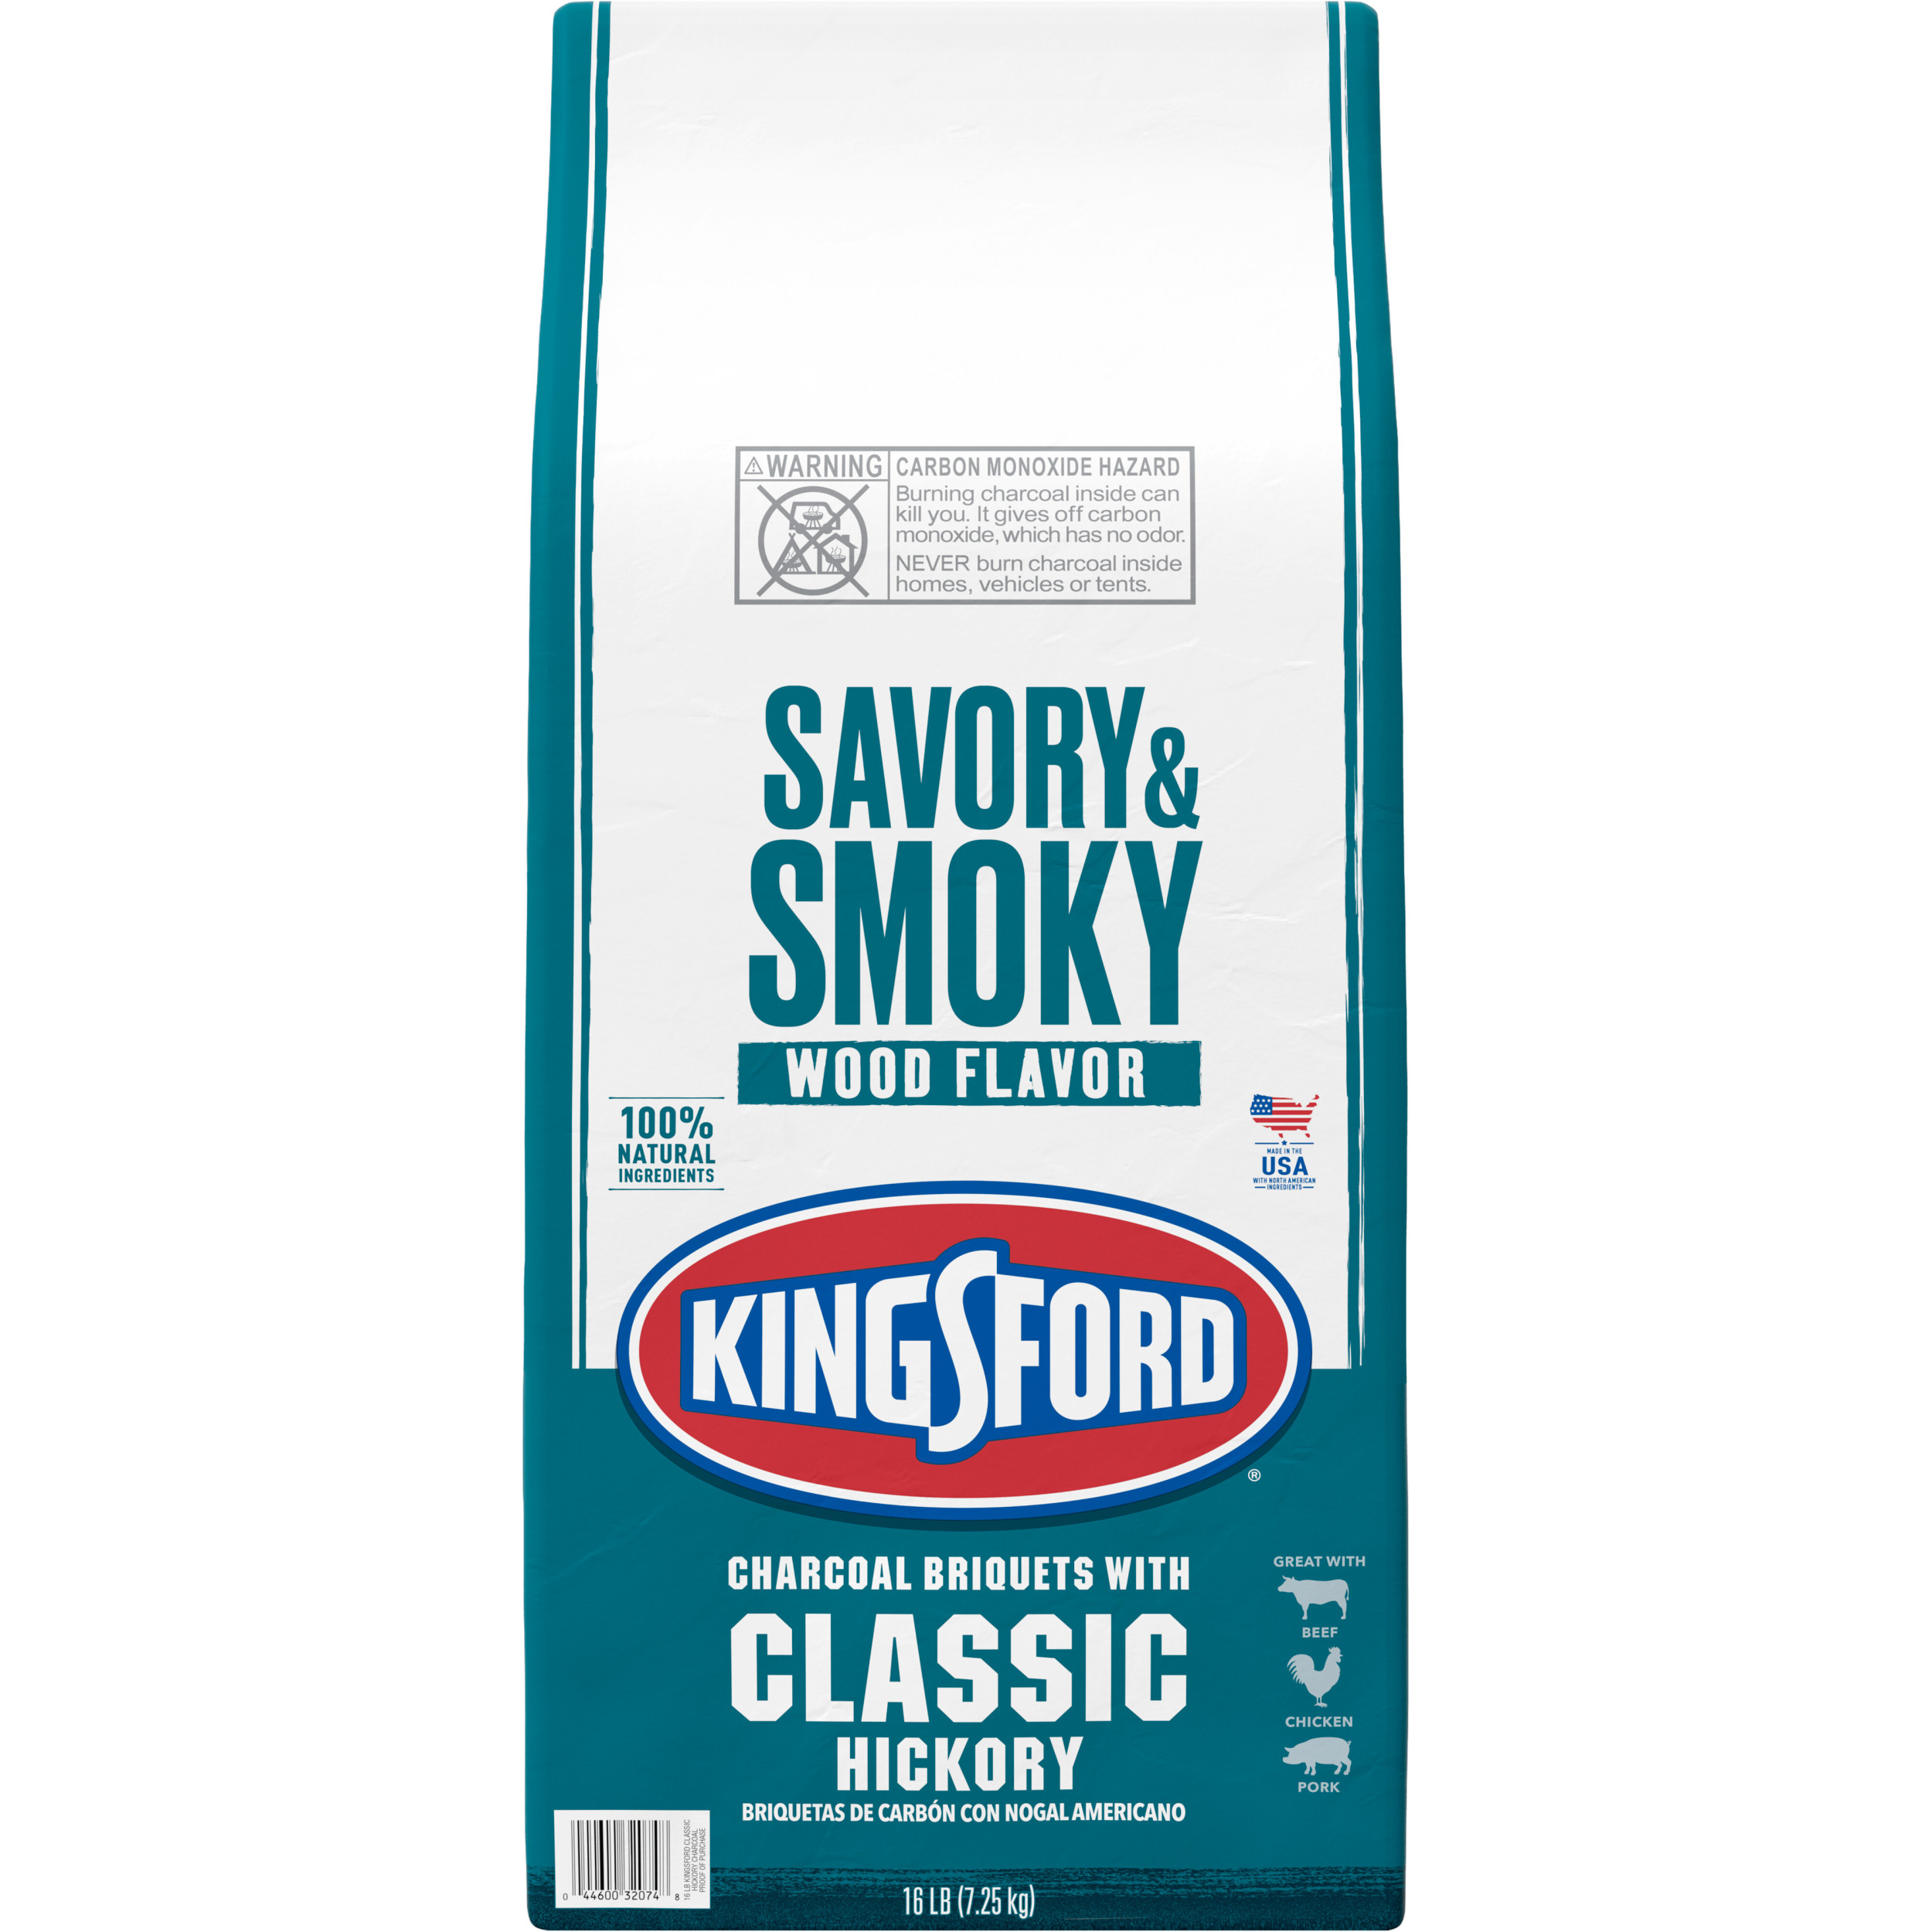 Kingsford Charcoal Briquettes with Classic Hickory, BBQ Charcoal for Grilling, 16 Pounds - image 9 of 16